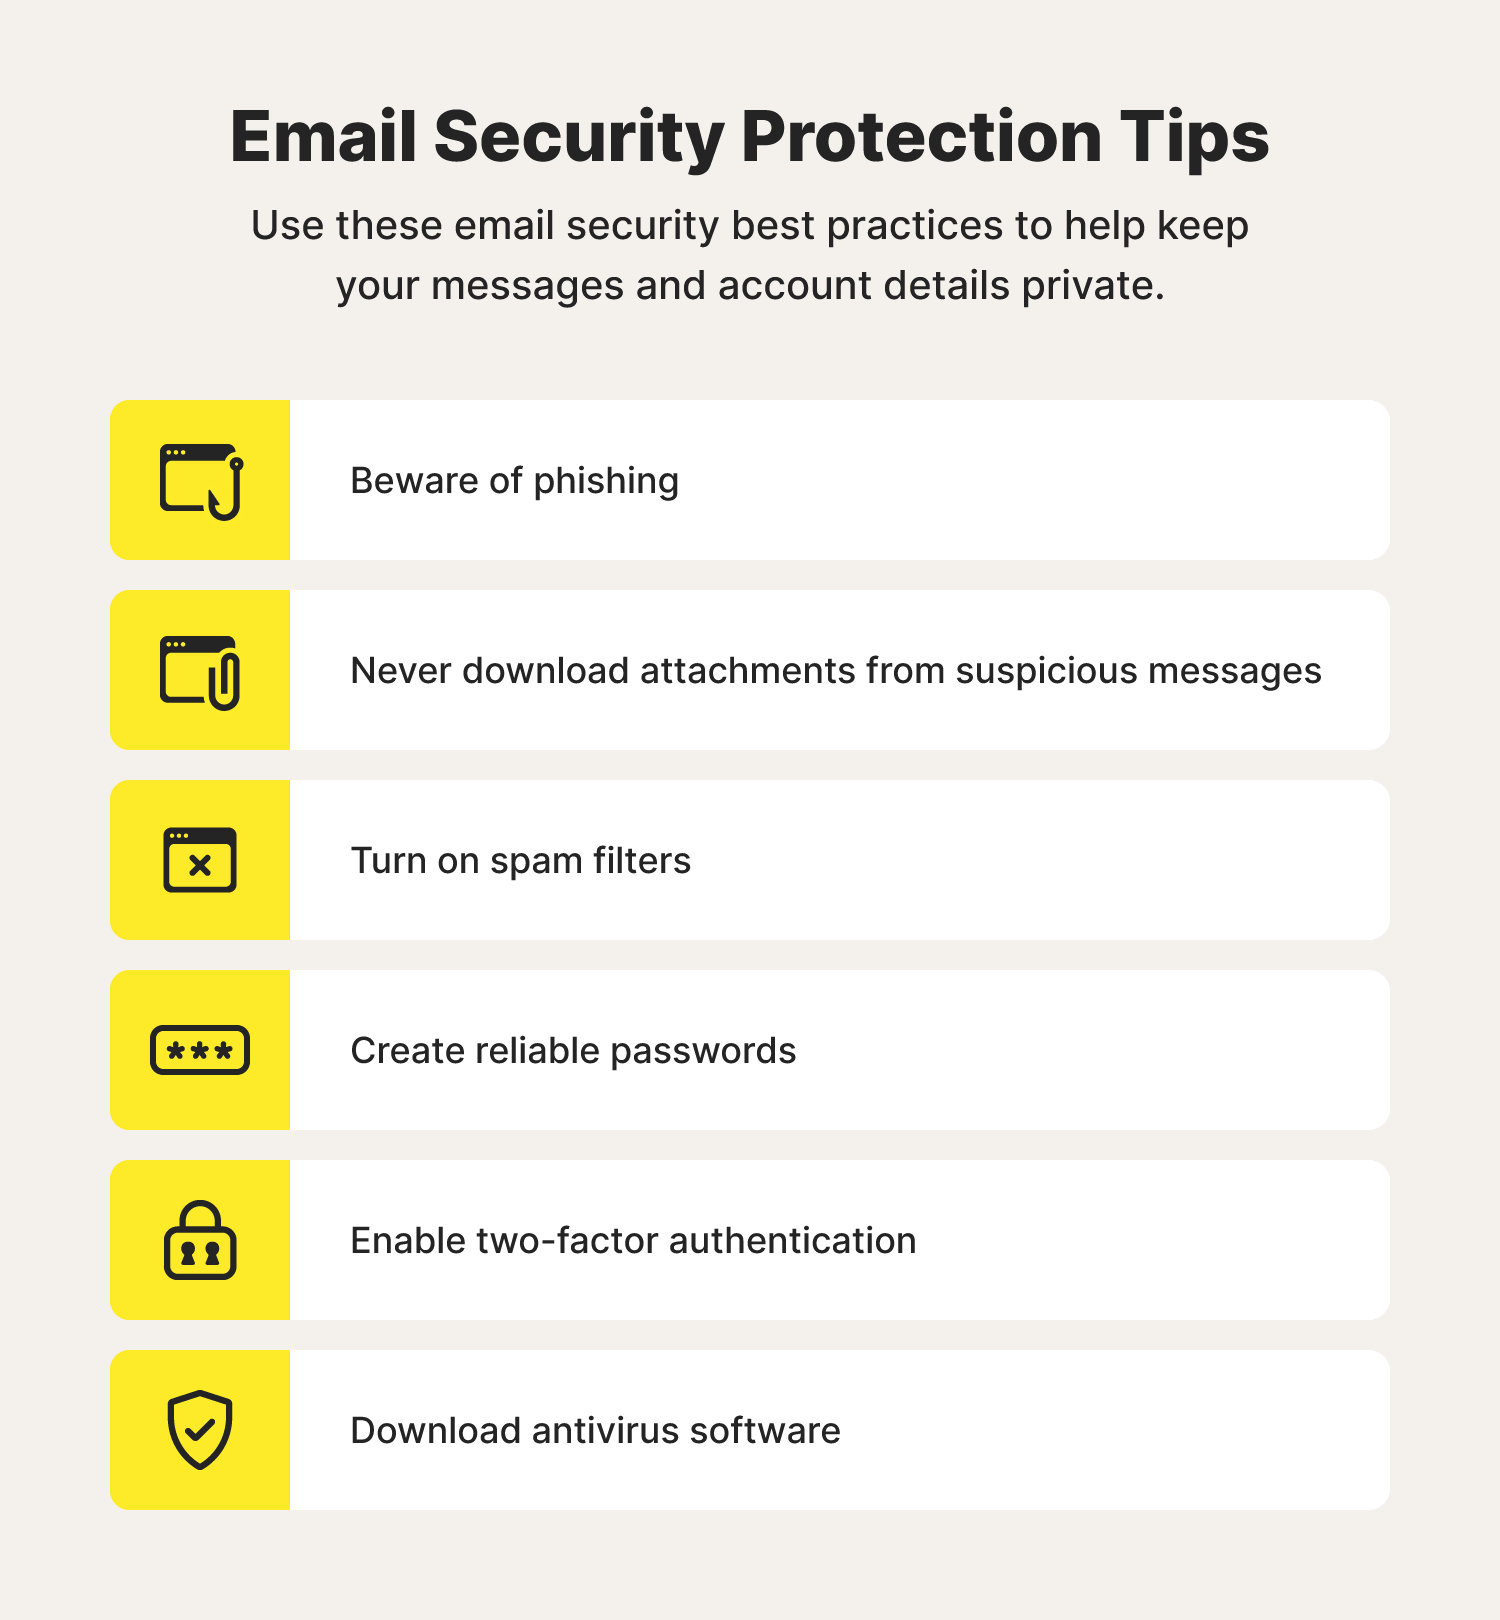 A checklist overviews six steps to level up your email security, including being aware of phishing, never downloading attachments from suspicious messages, turning on spam filters, creating reliable passwords, enabling 2FA, and downloading antivirus software.